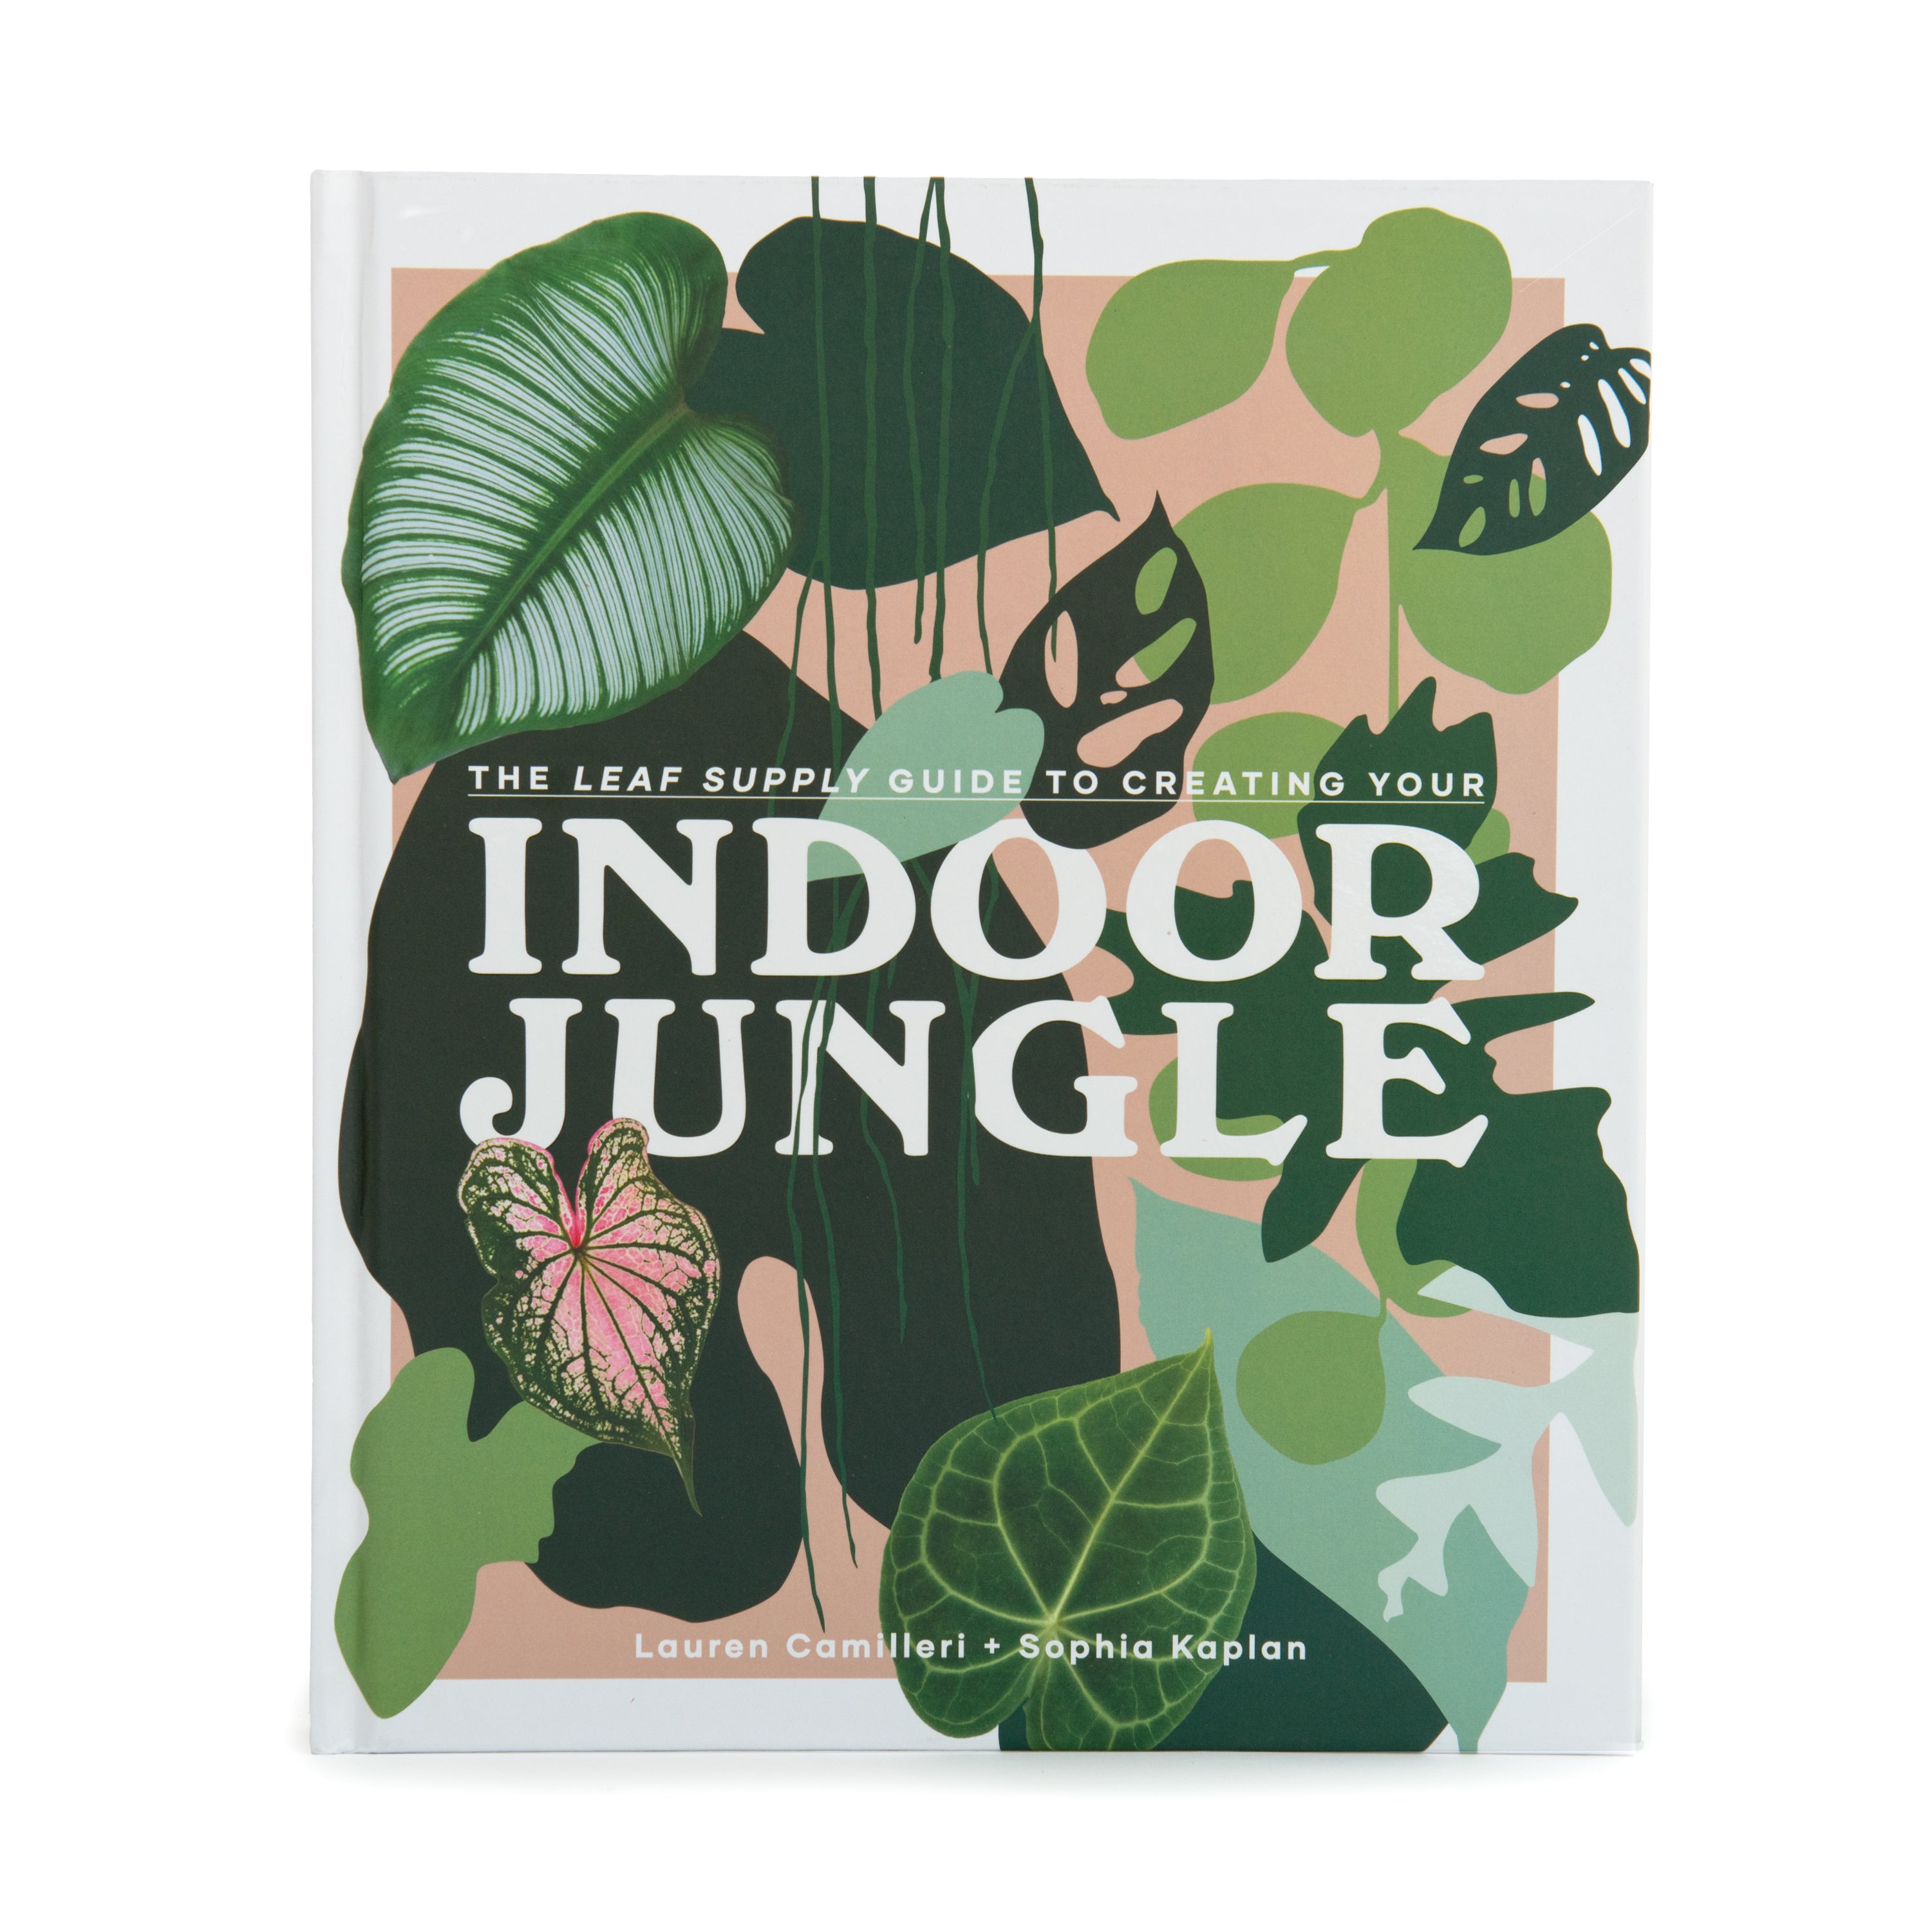 The Leaf Supply Guide to Creating Your Indoor Jungle (Hardcover)